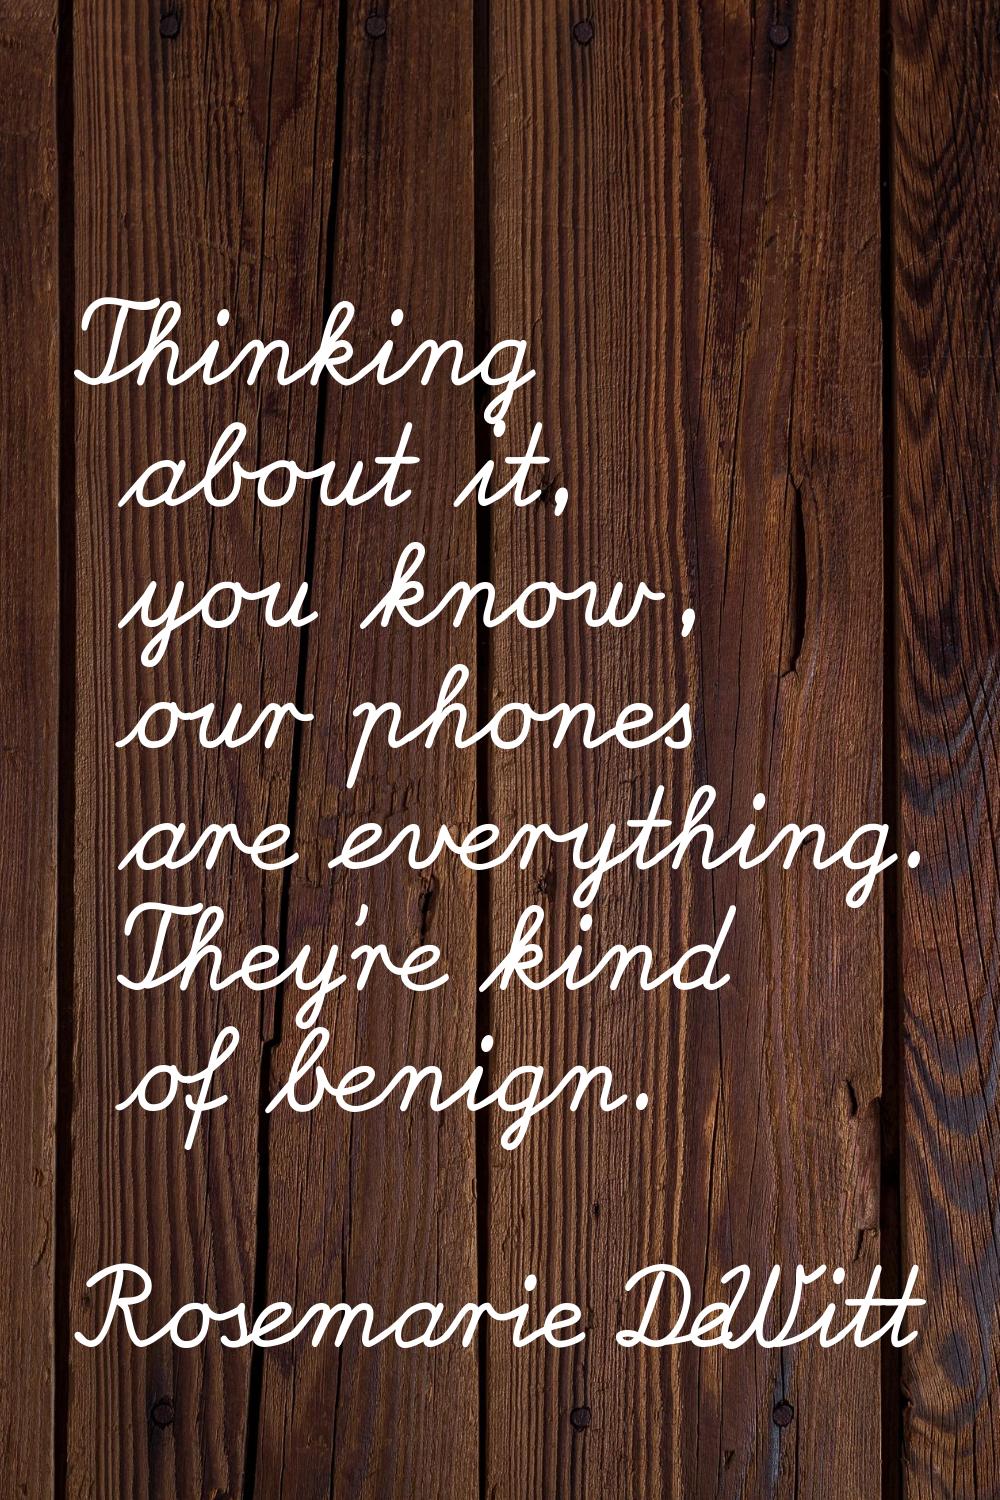 Thinking about it, you know, our phones are everything. They're kind of benign.